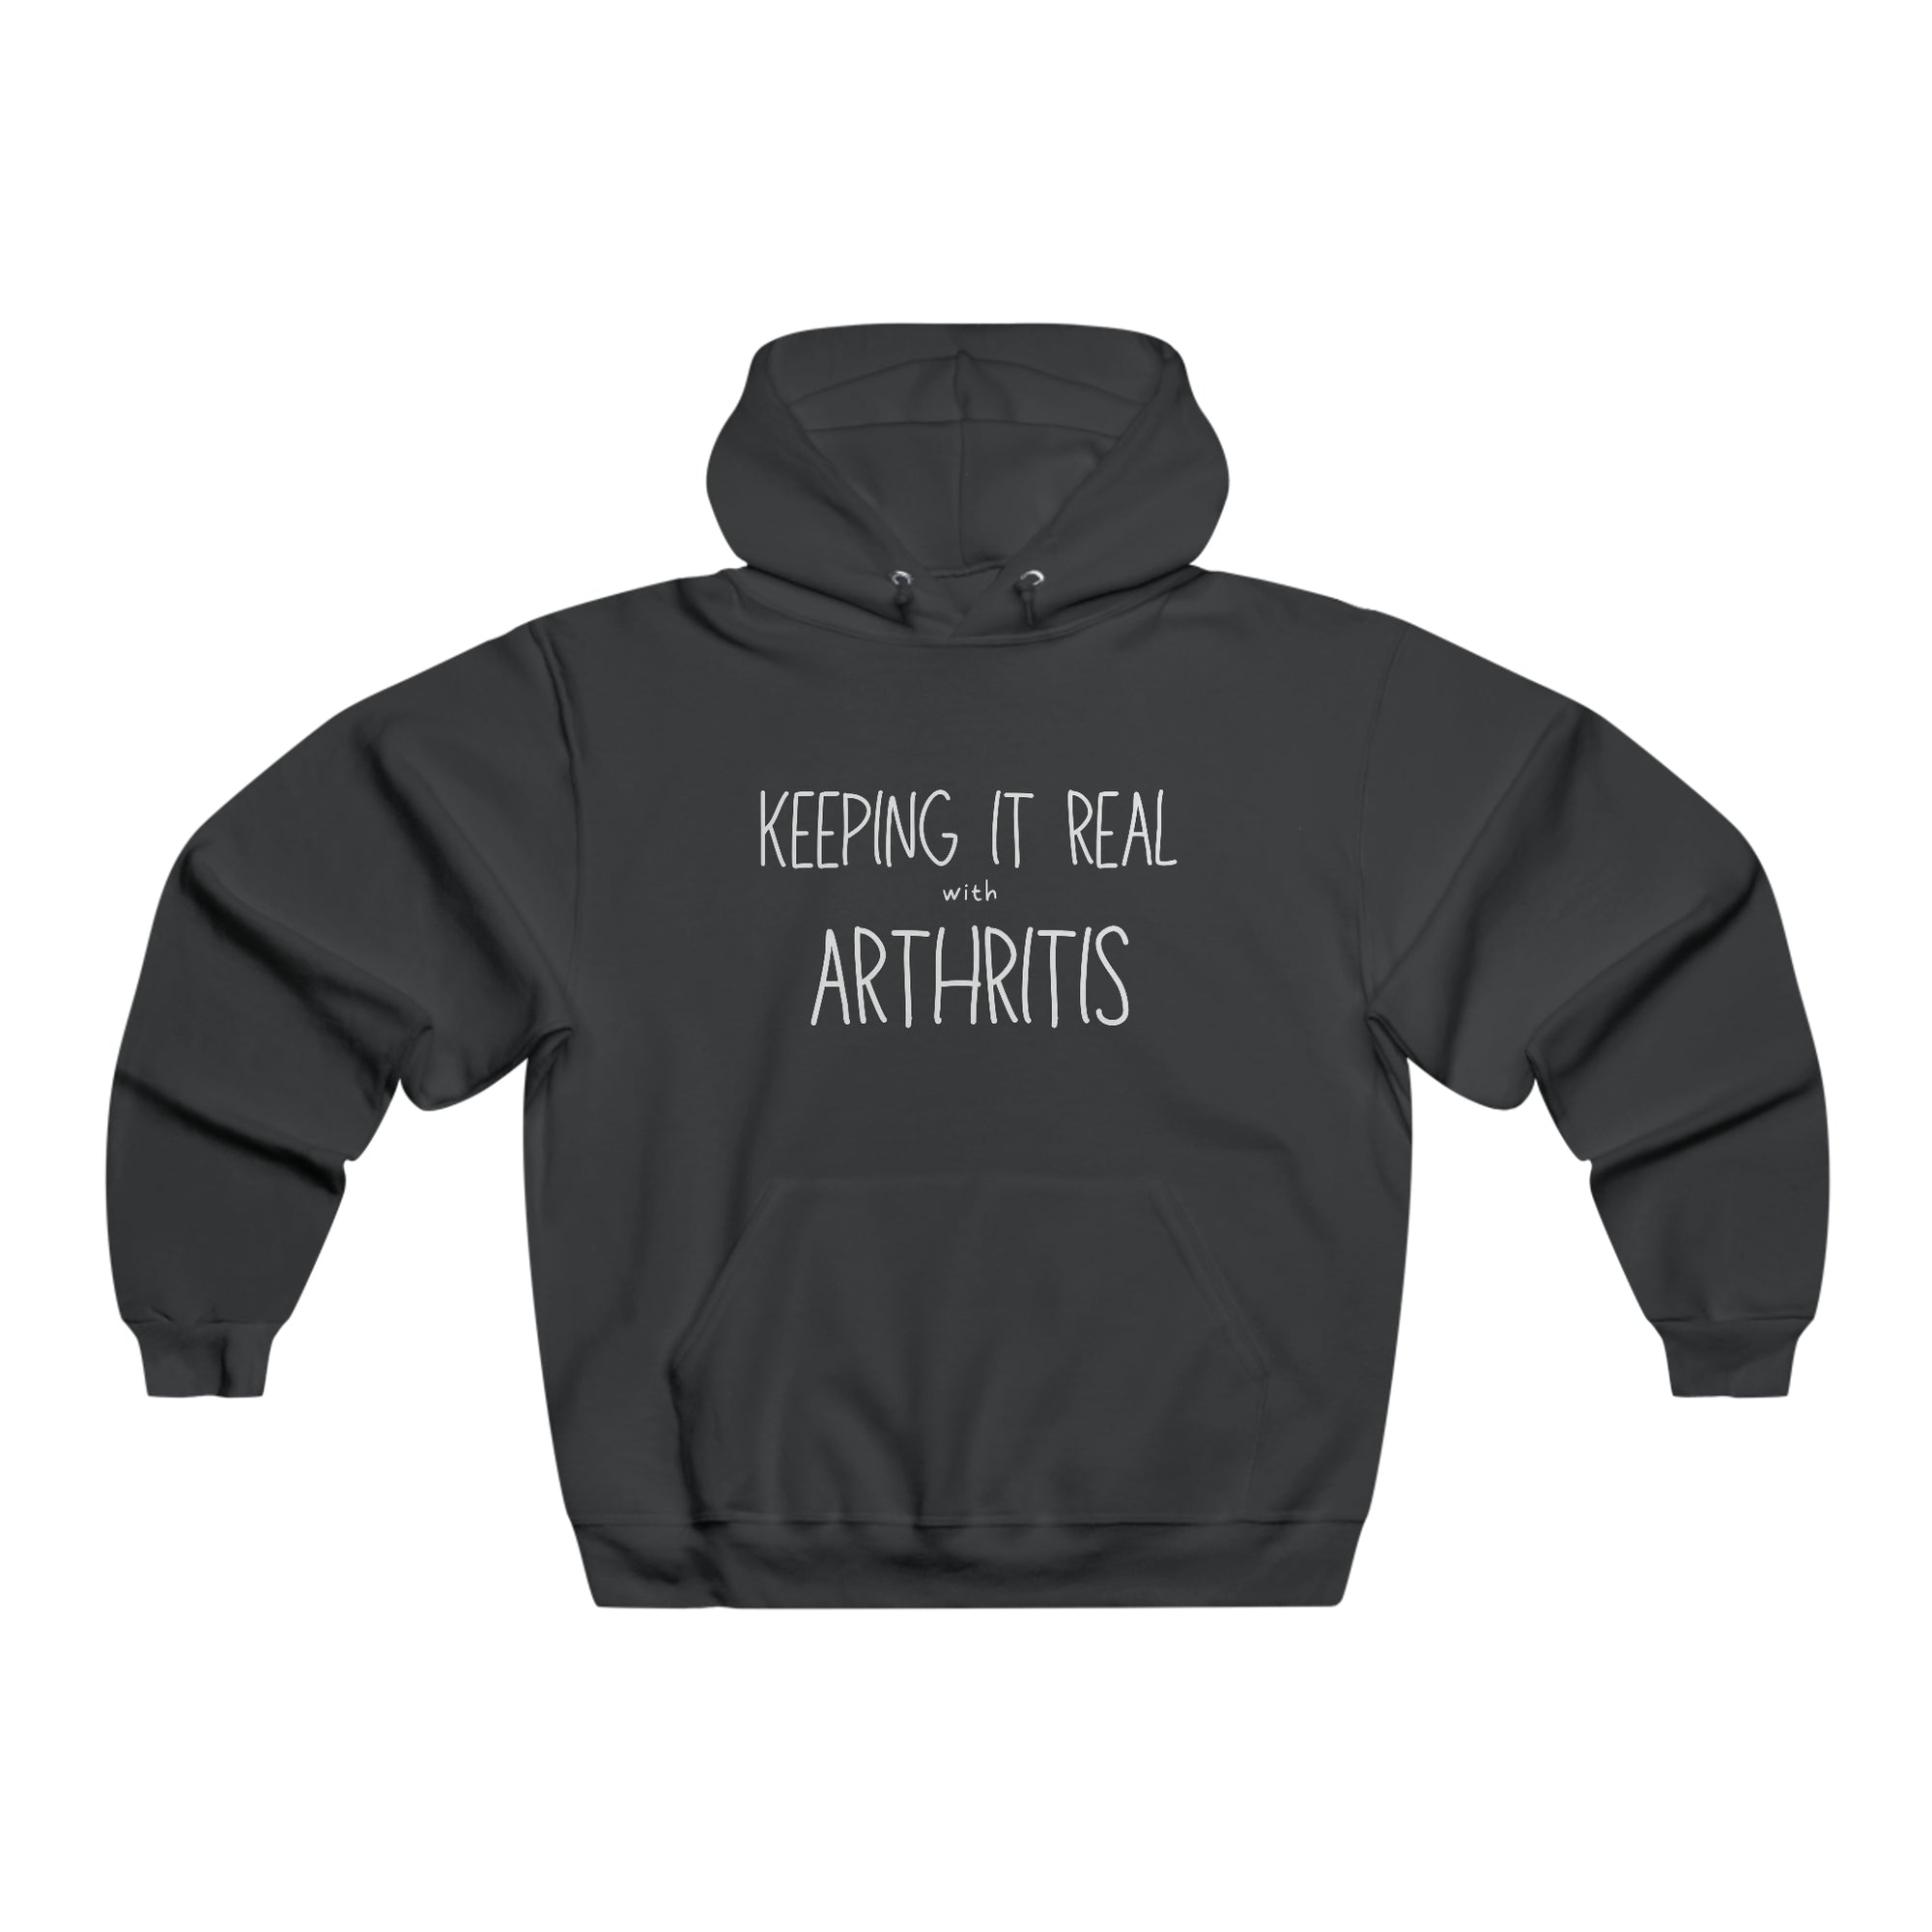 "Keeping it Real with Arthritis" + Arthritis Facts Hoodie